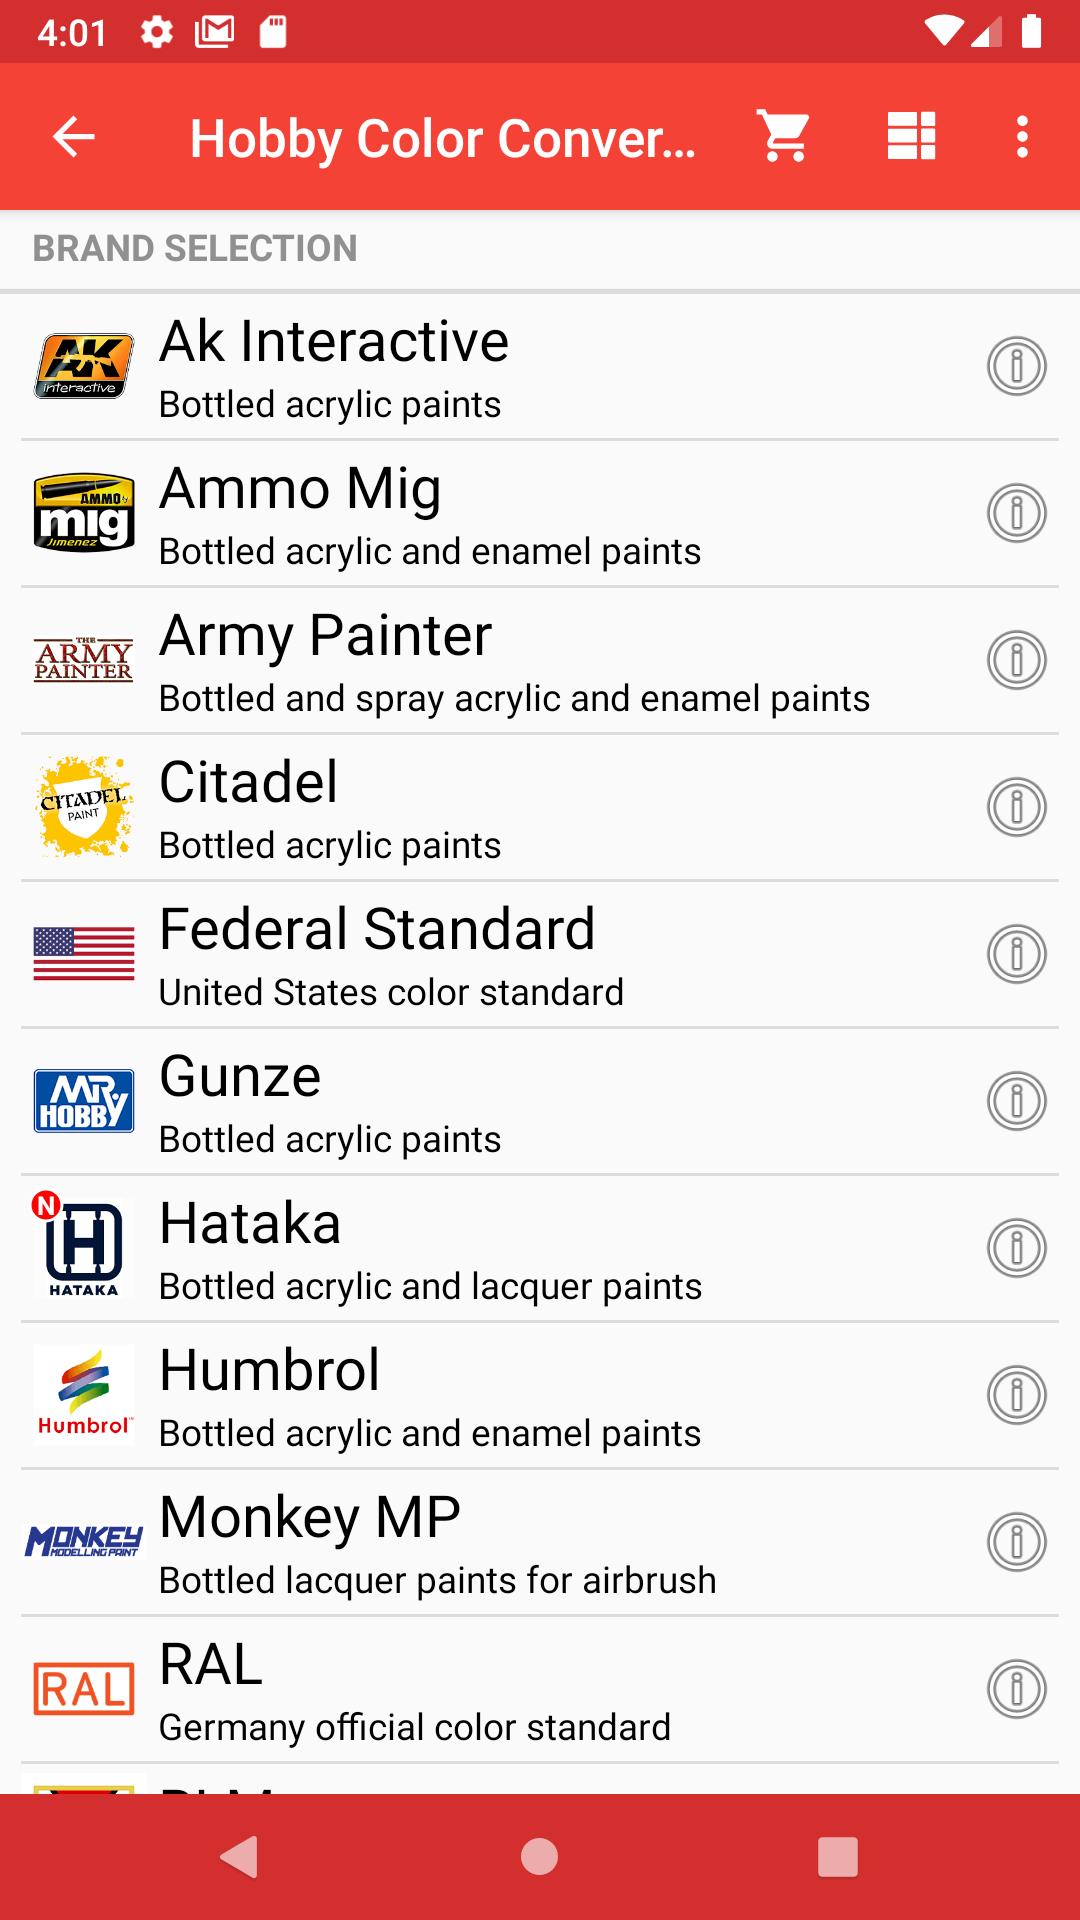 Hobby Color Converter for Android - APK Download